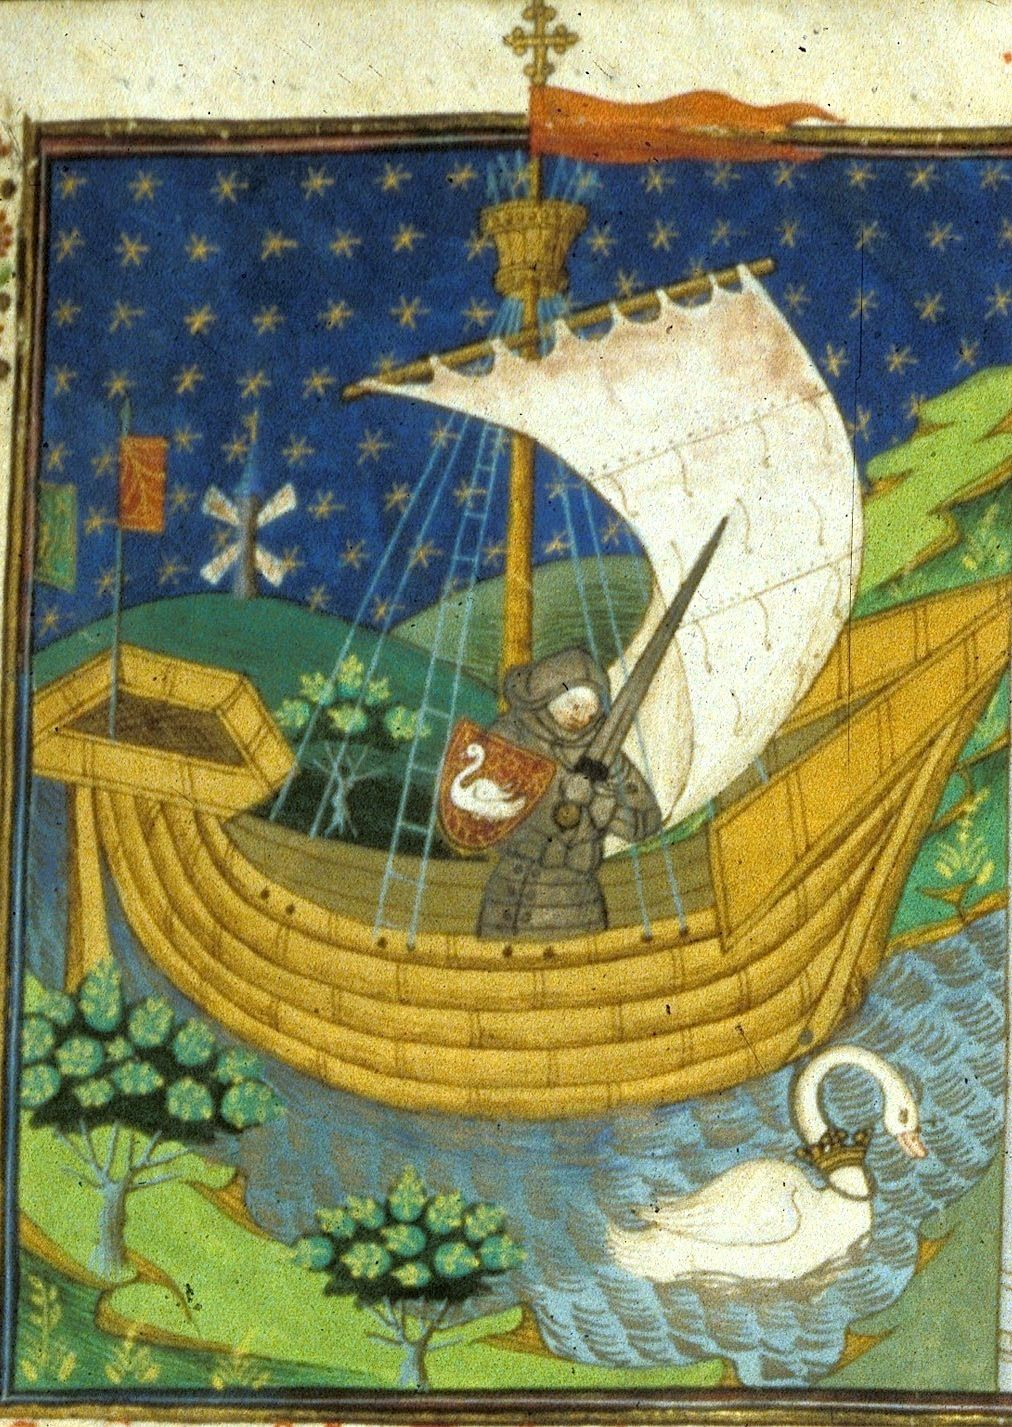 A sailor in a boat. In the water, a swan with a crown around its neck.